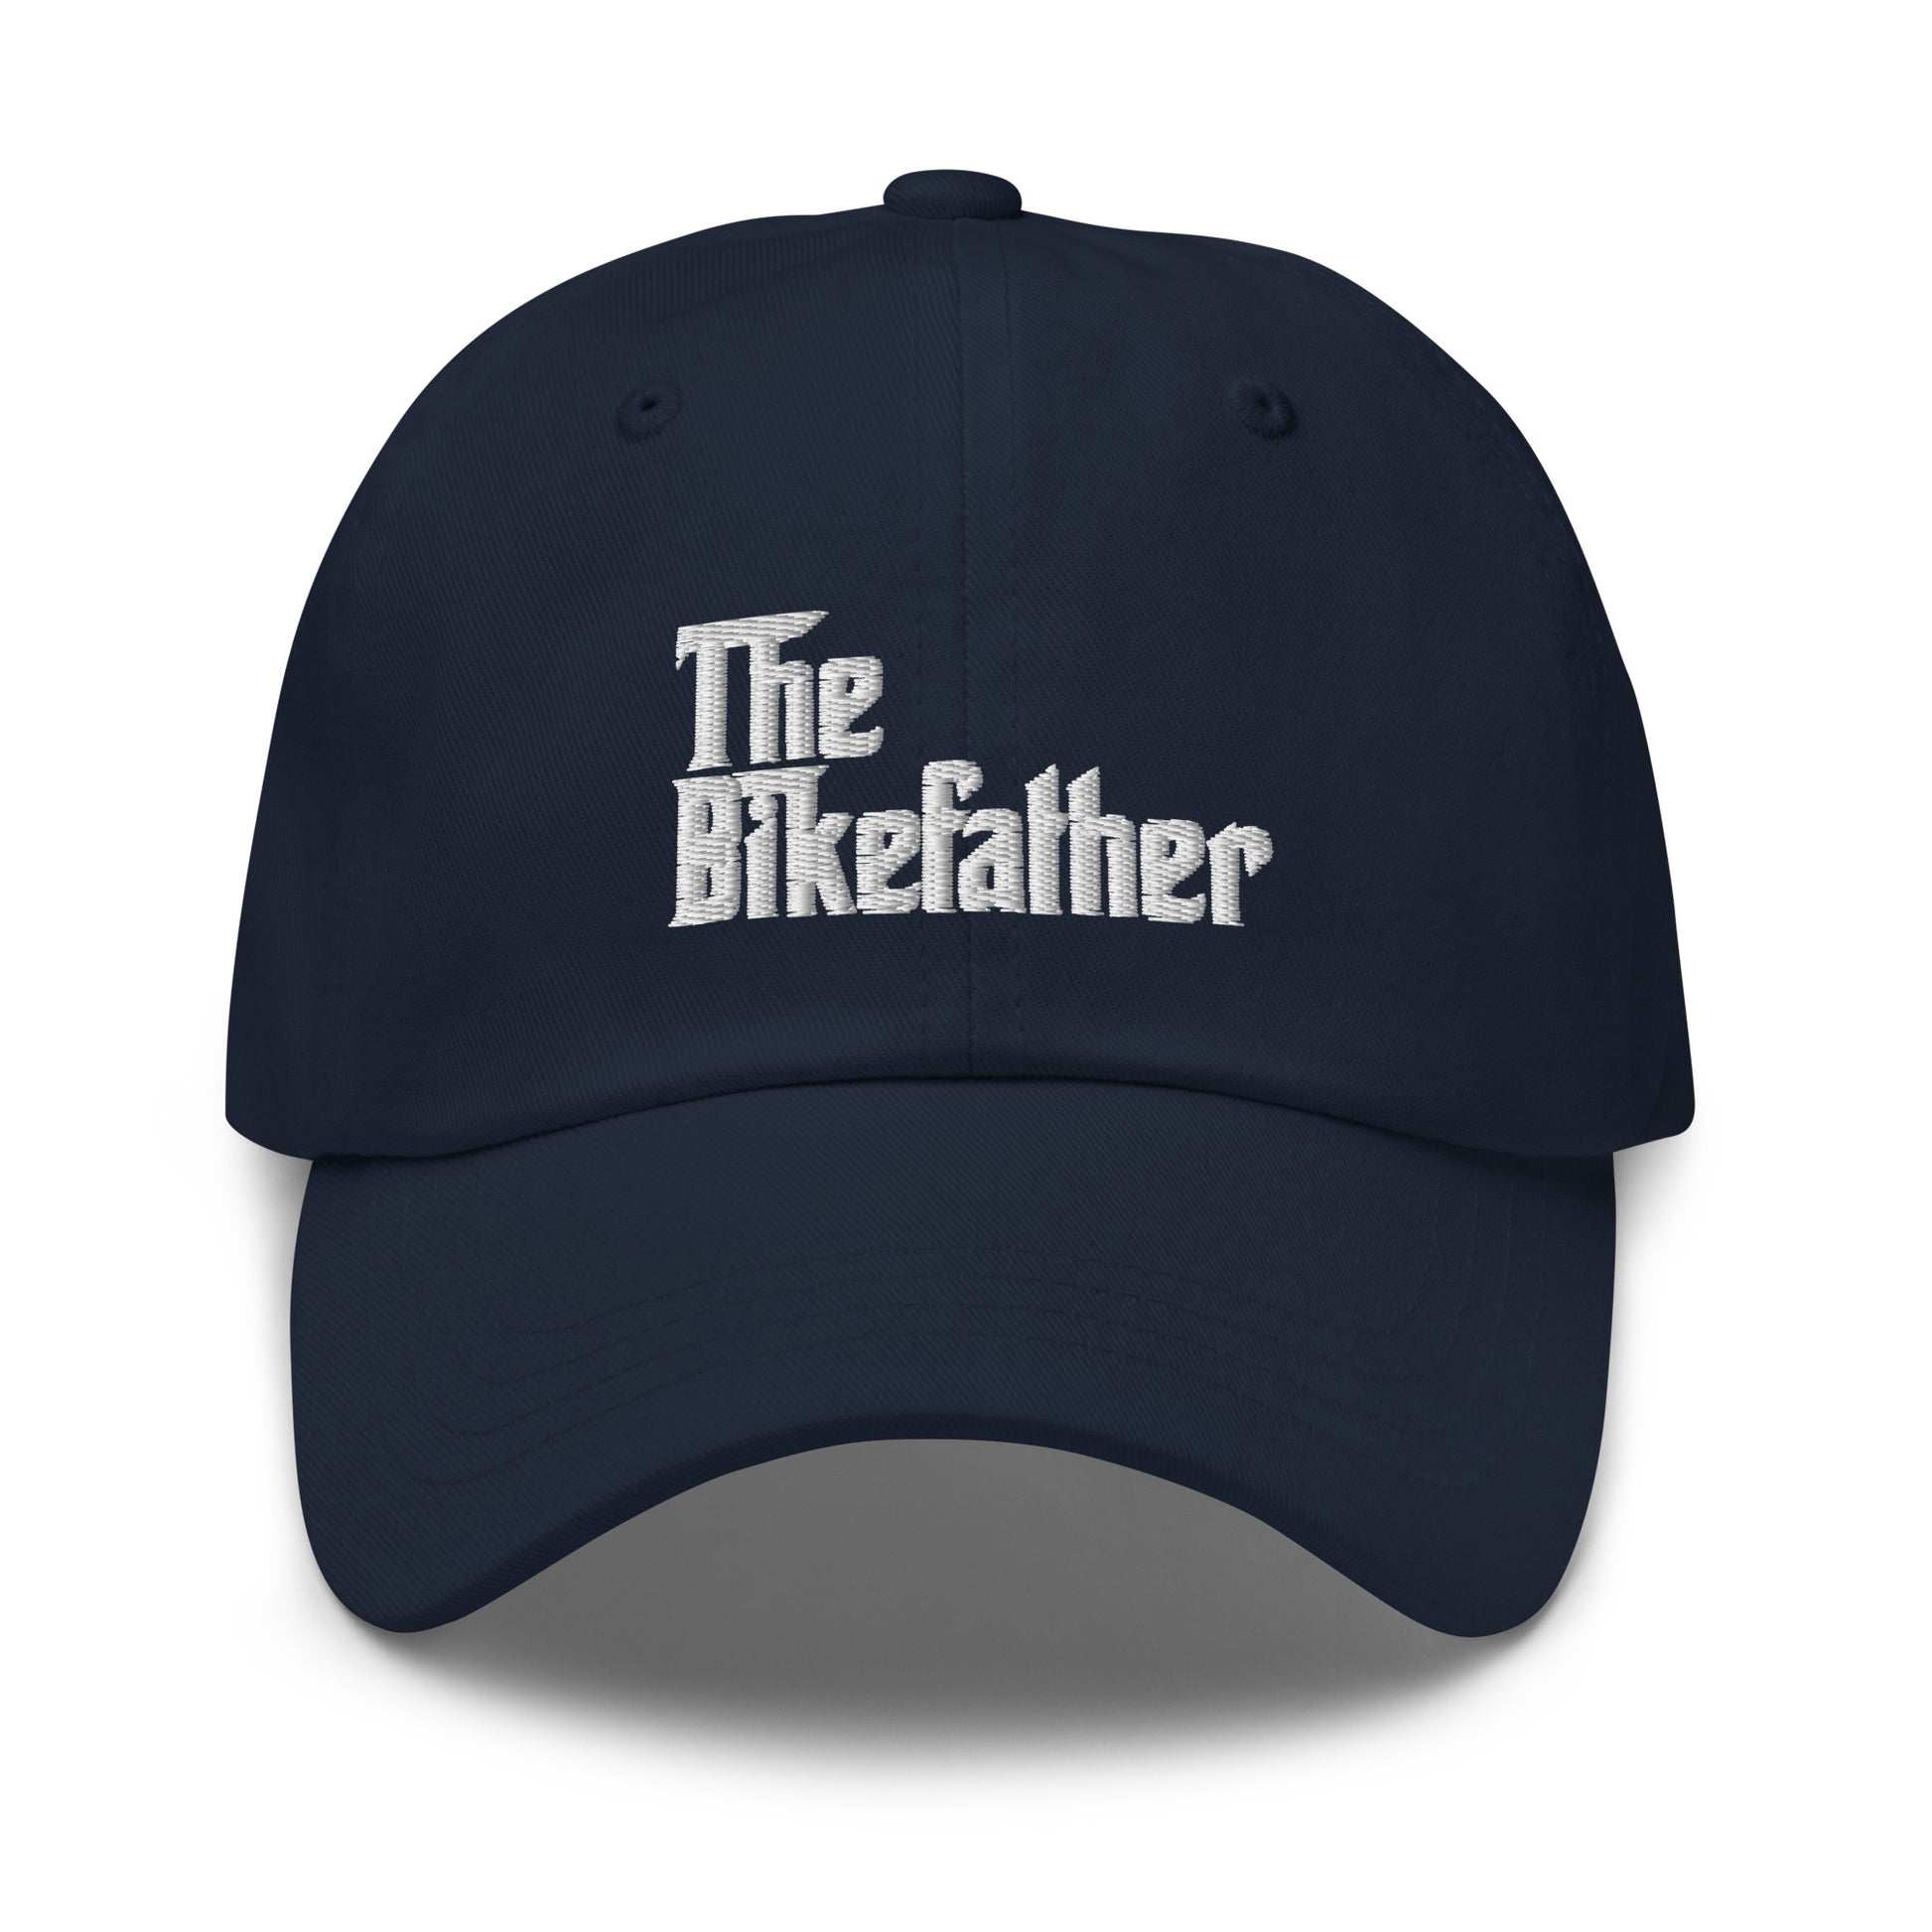 The Bikefather funny cap hat Fathers Day gift for Cycling dads bike lovers  embroidered  navy